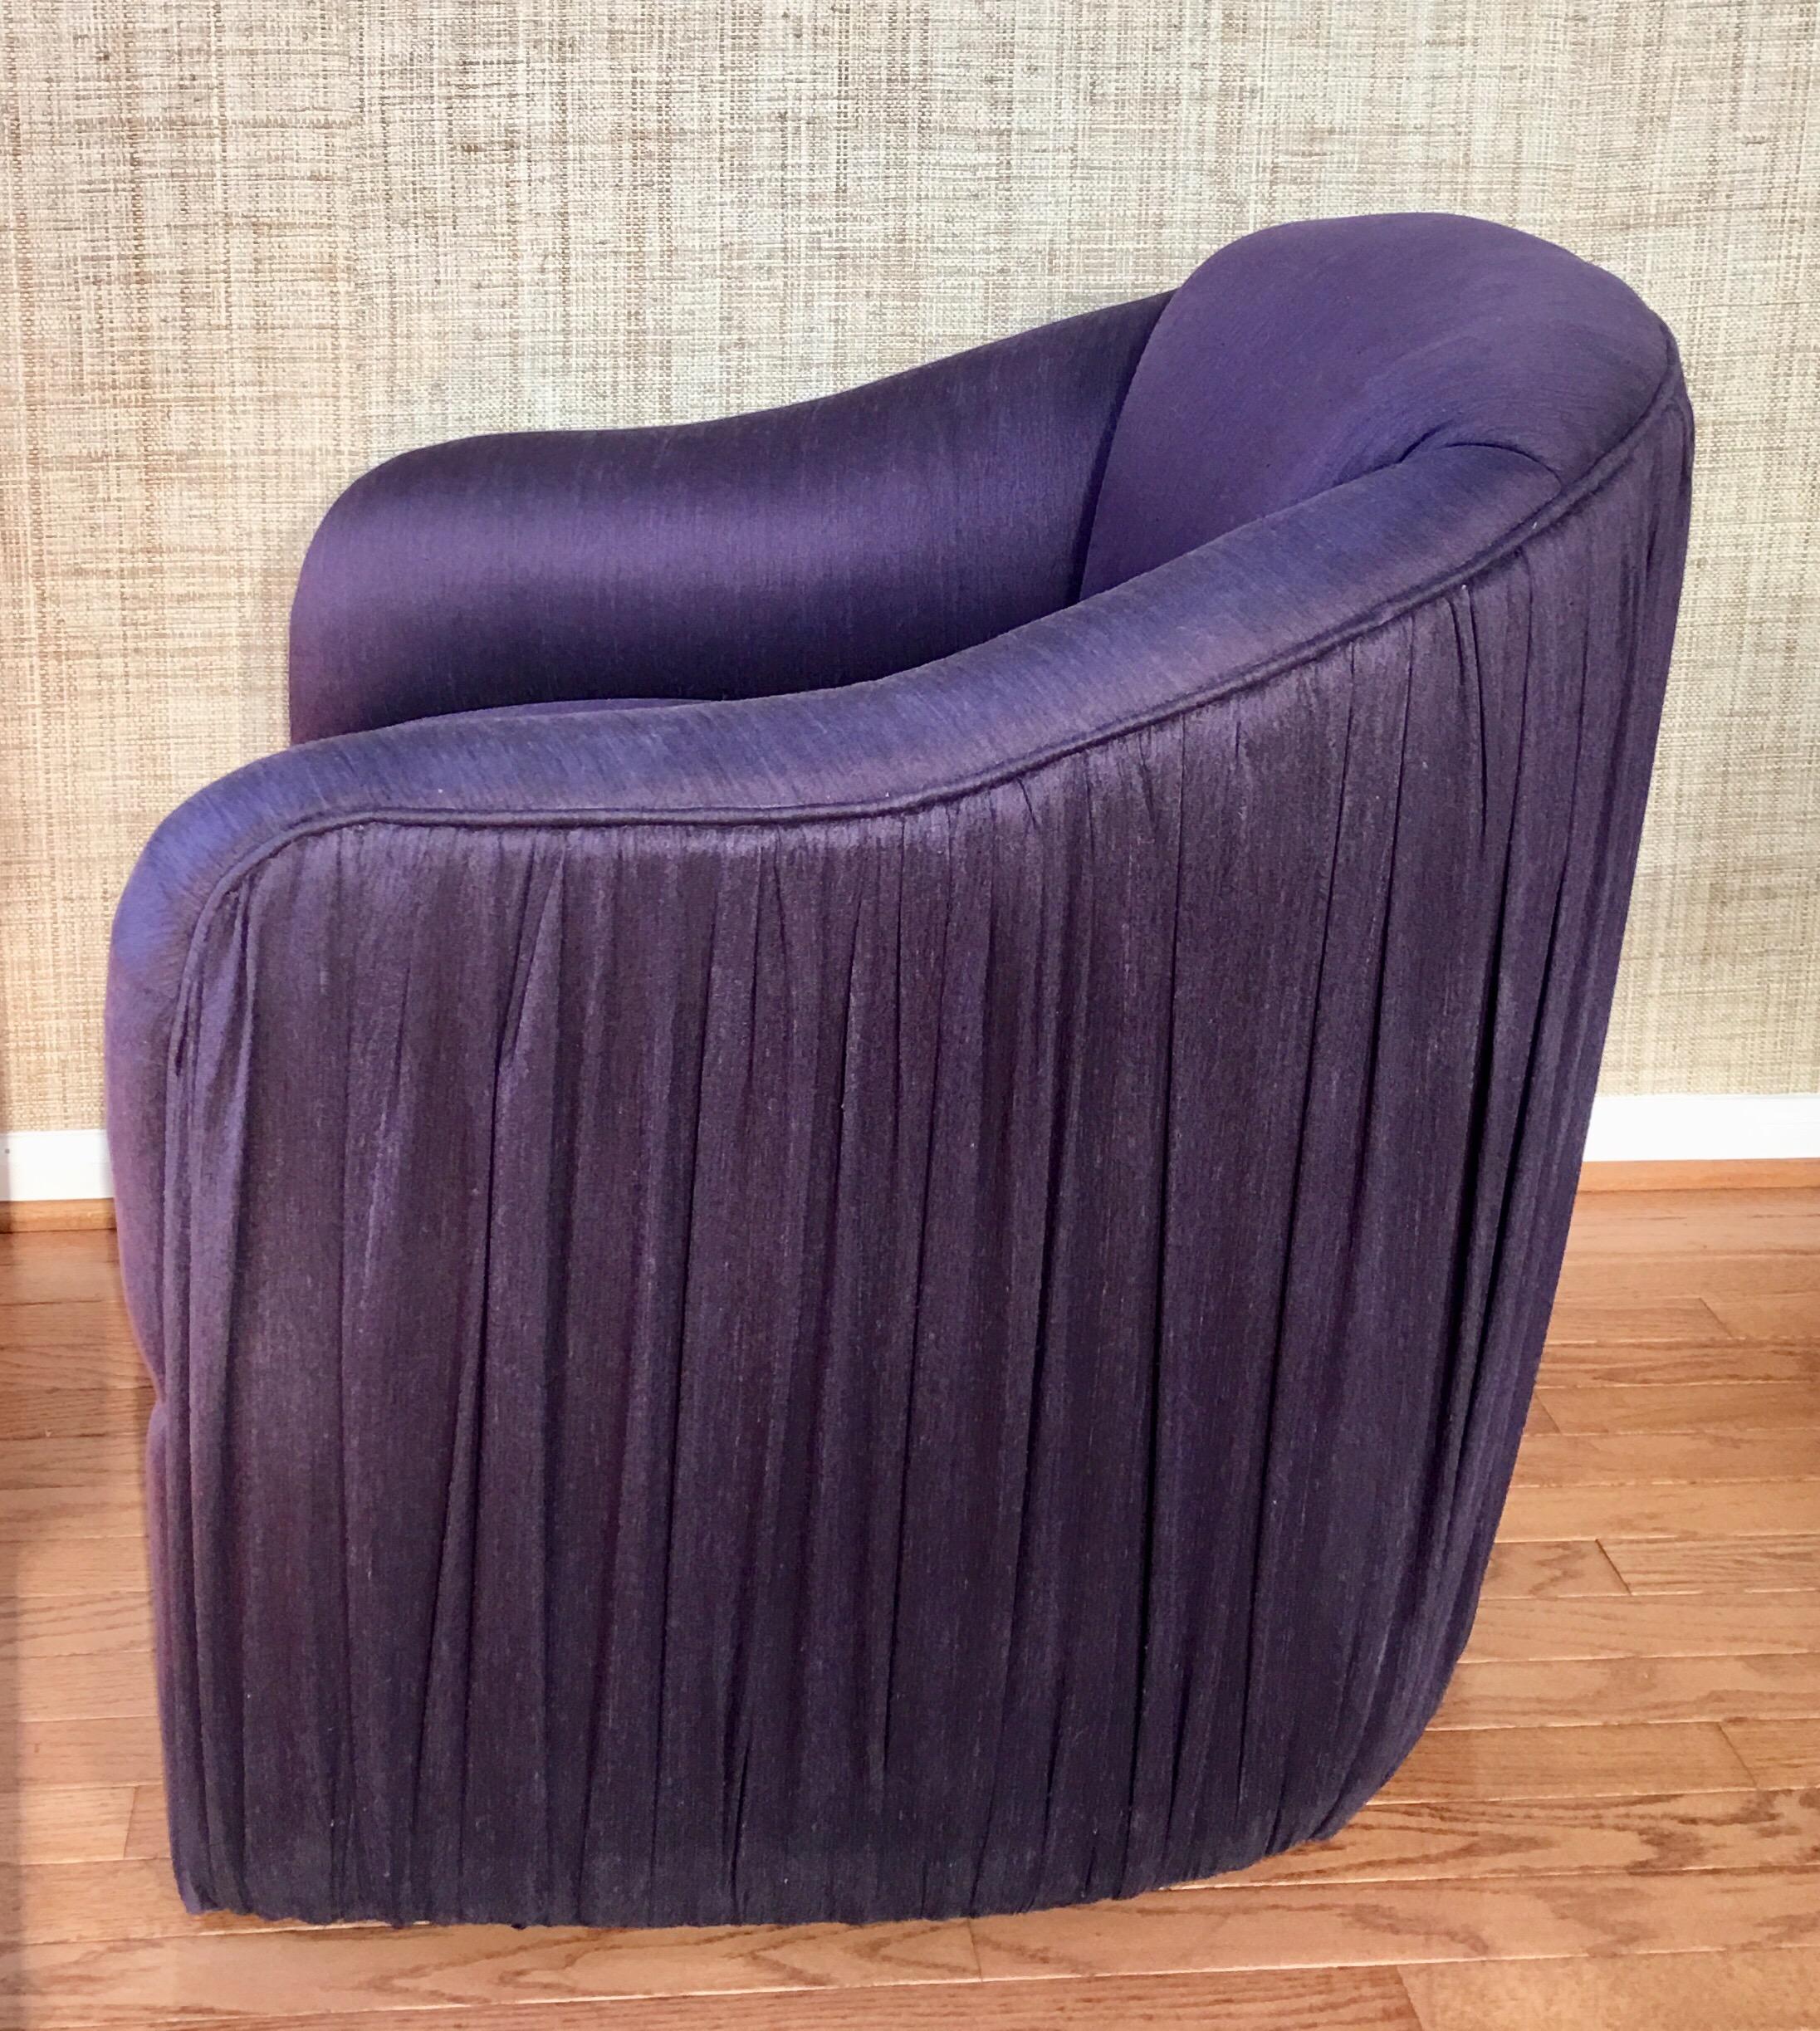 Unique and sculptural lounge chair with matching round soufflé pouf ottoman featuring original aubergine or purple toned fabric. Design details of this custom seating set includes ruched or pleated fabric on outside back/sides of chair and on the